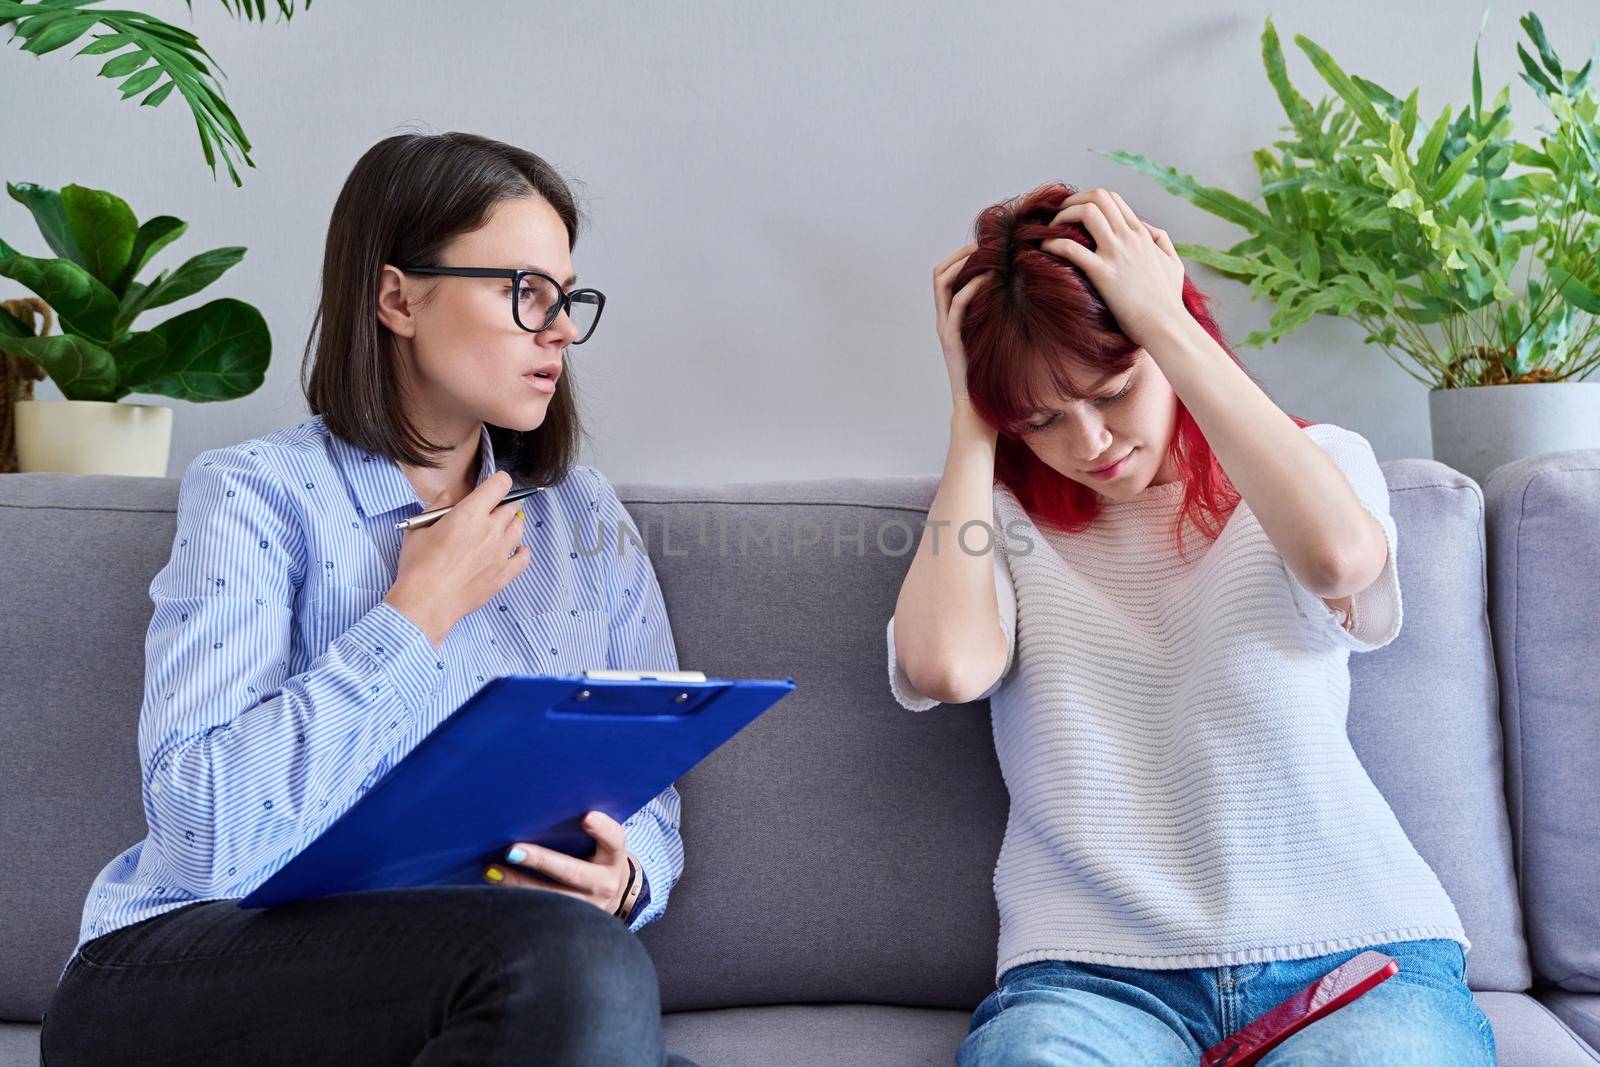 Professional psychologist working with teenage student girl. Female patient stressed out, individual therapy, help to teenager. Mental health, counseling, adolescence, psychology, psychiatry concept